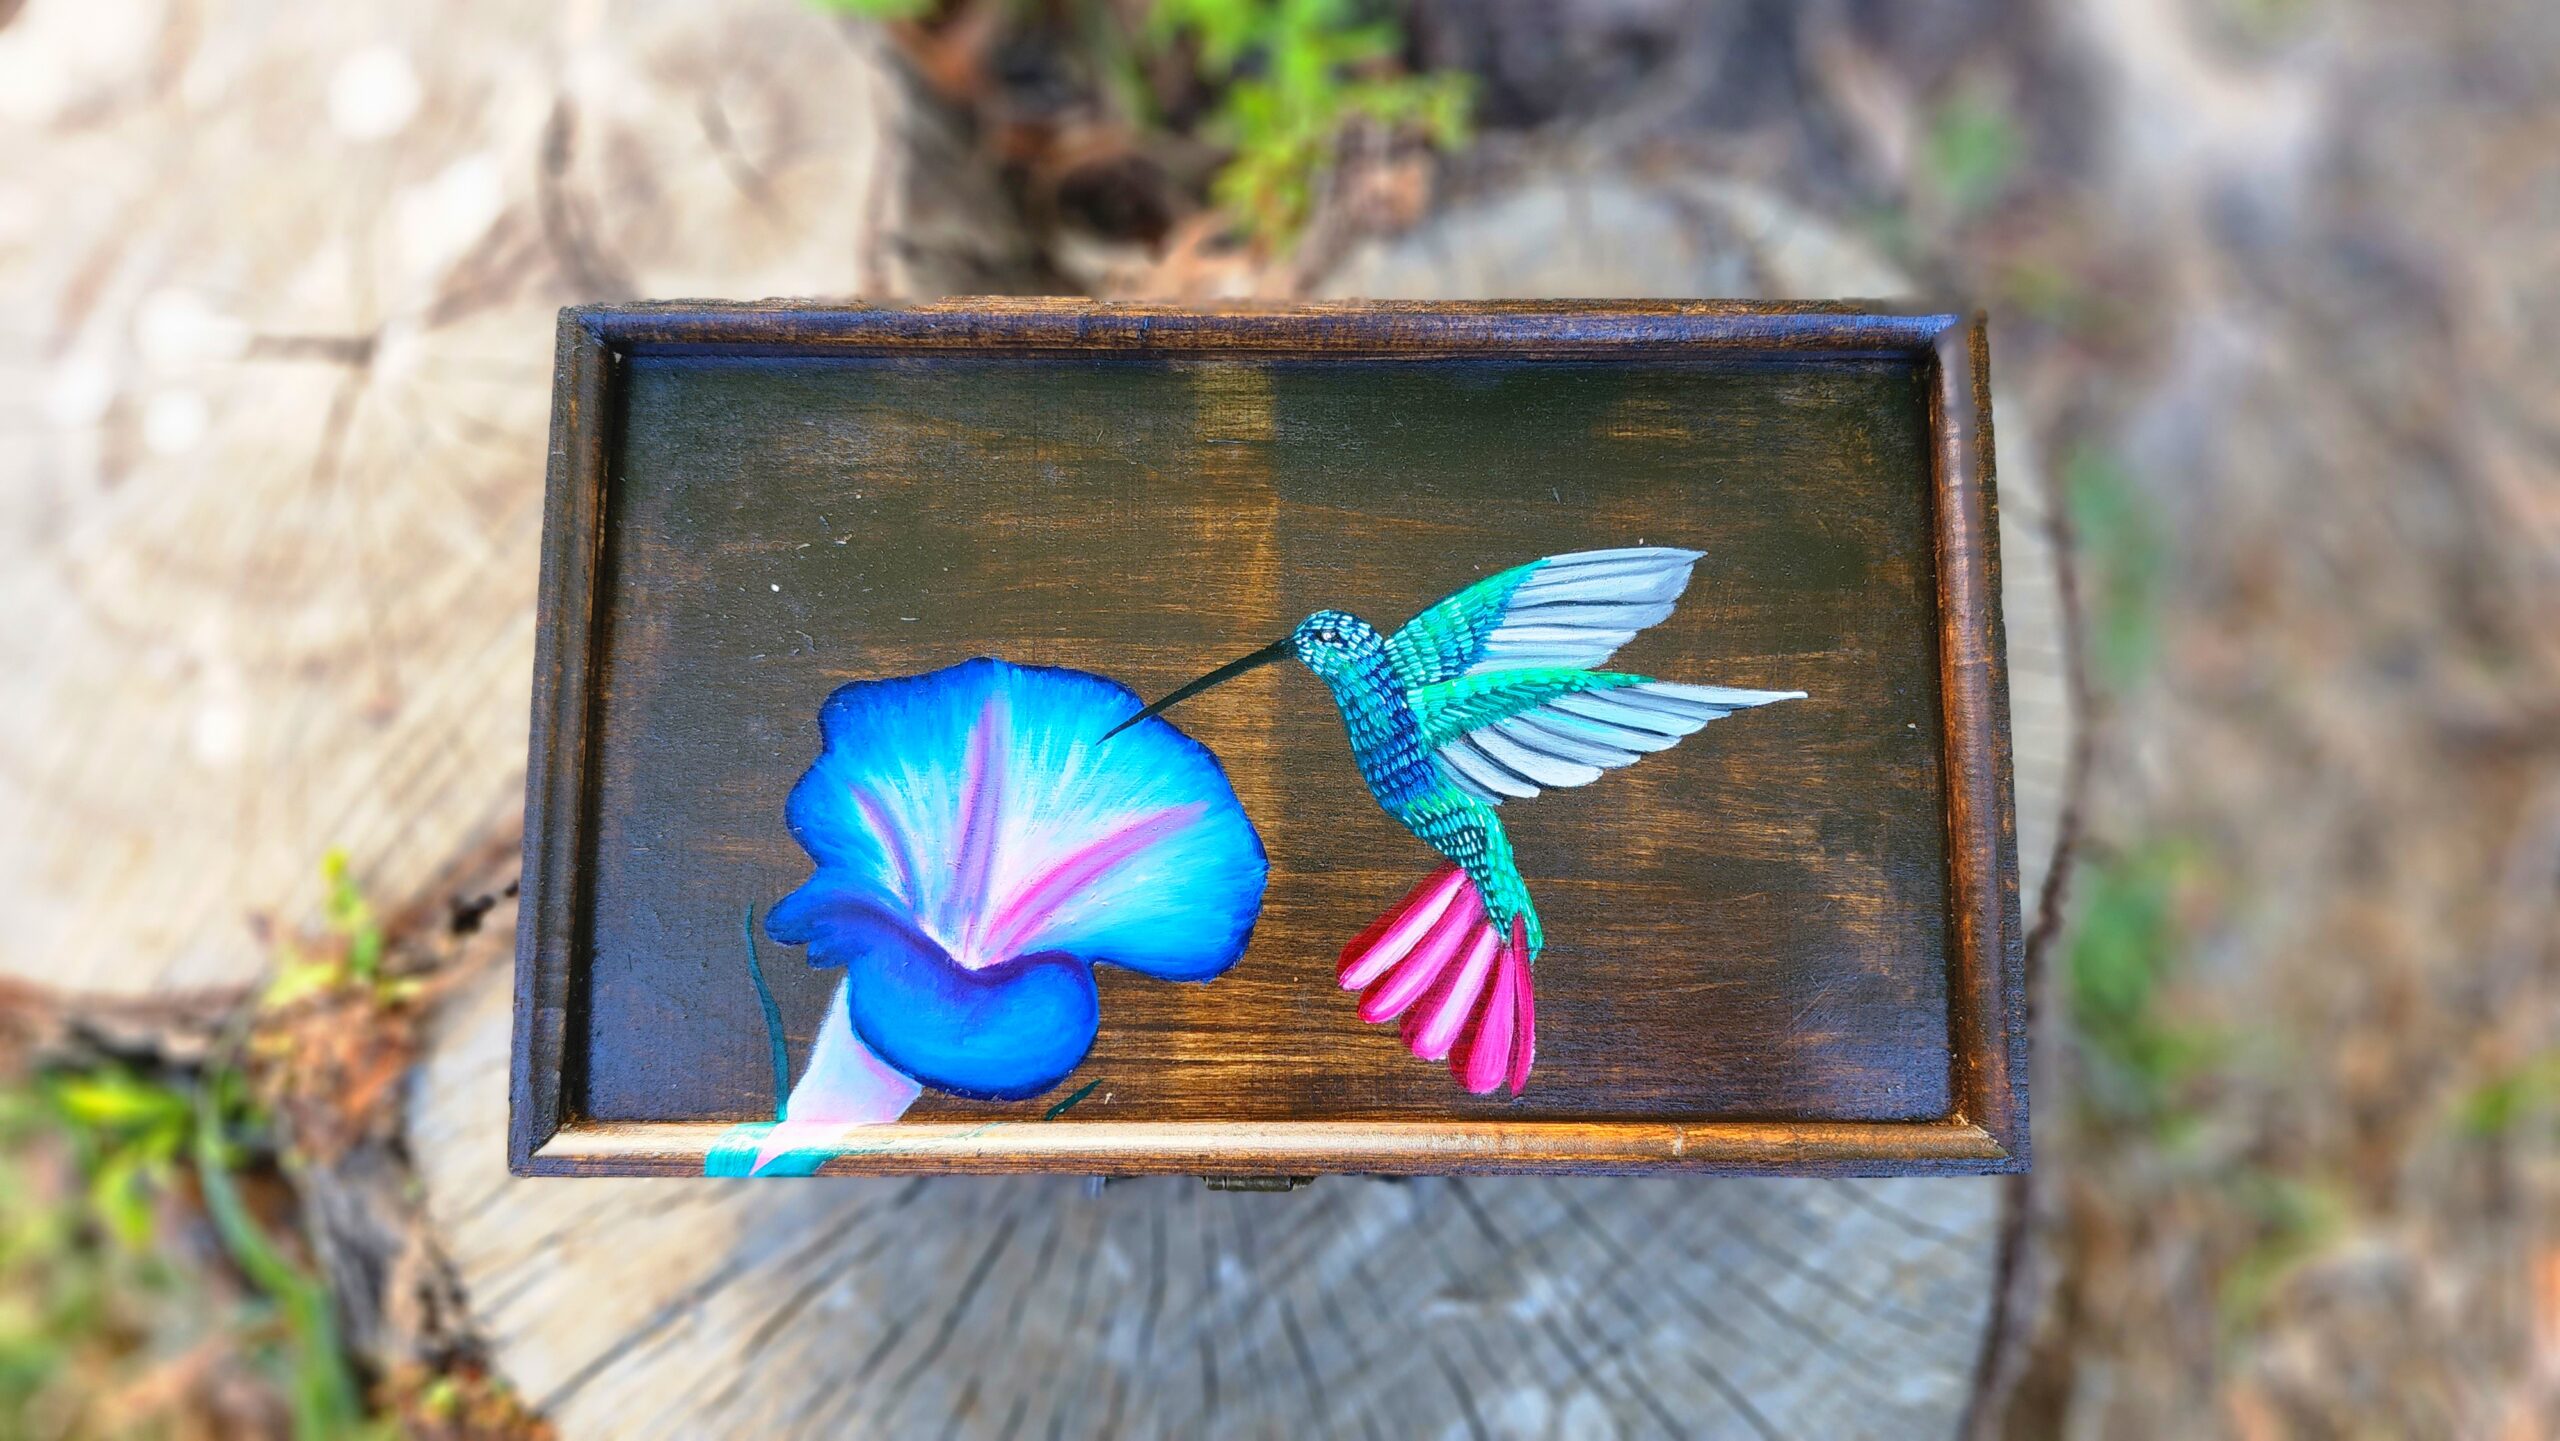 Beautiful handpainted trinket boxes with metal feet and a mirror. This cute trinket box is an ideal gift for a special loved one. You can store jewelry such as rings, necklaces, bracelets, or anything you would like to keep in a particular place, especially in this lovely and artistic trinket box.
Not rings included.